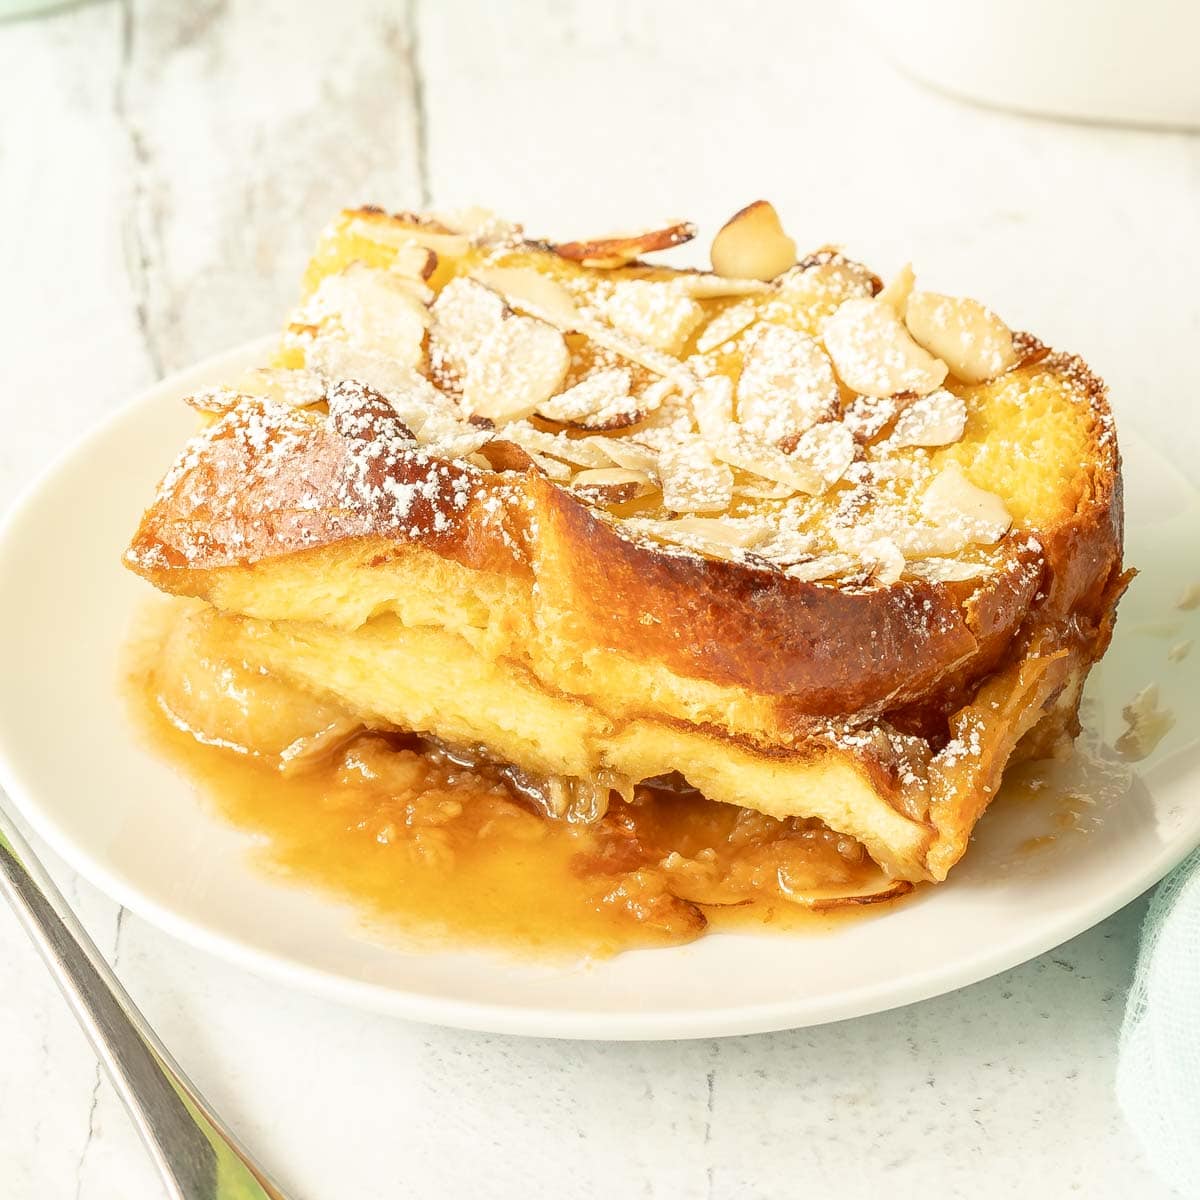 Close up of a single slice of Baked Banana French Toast